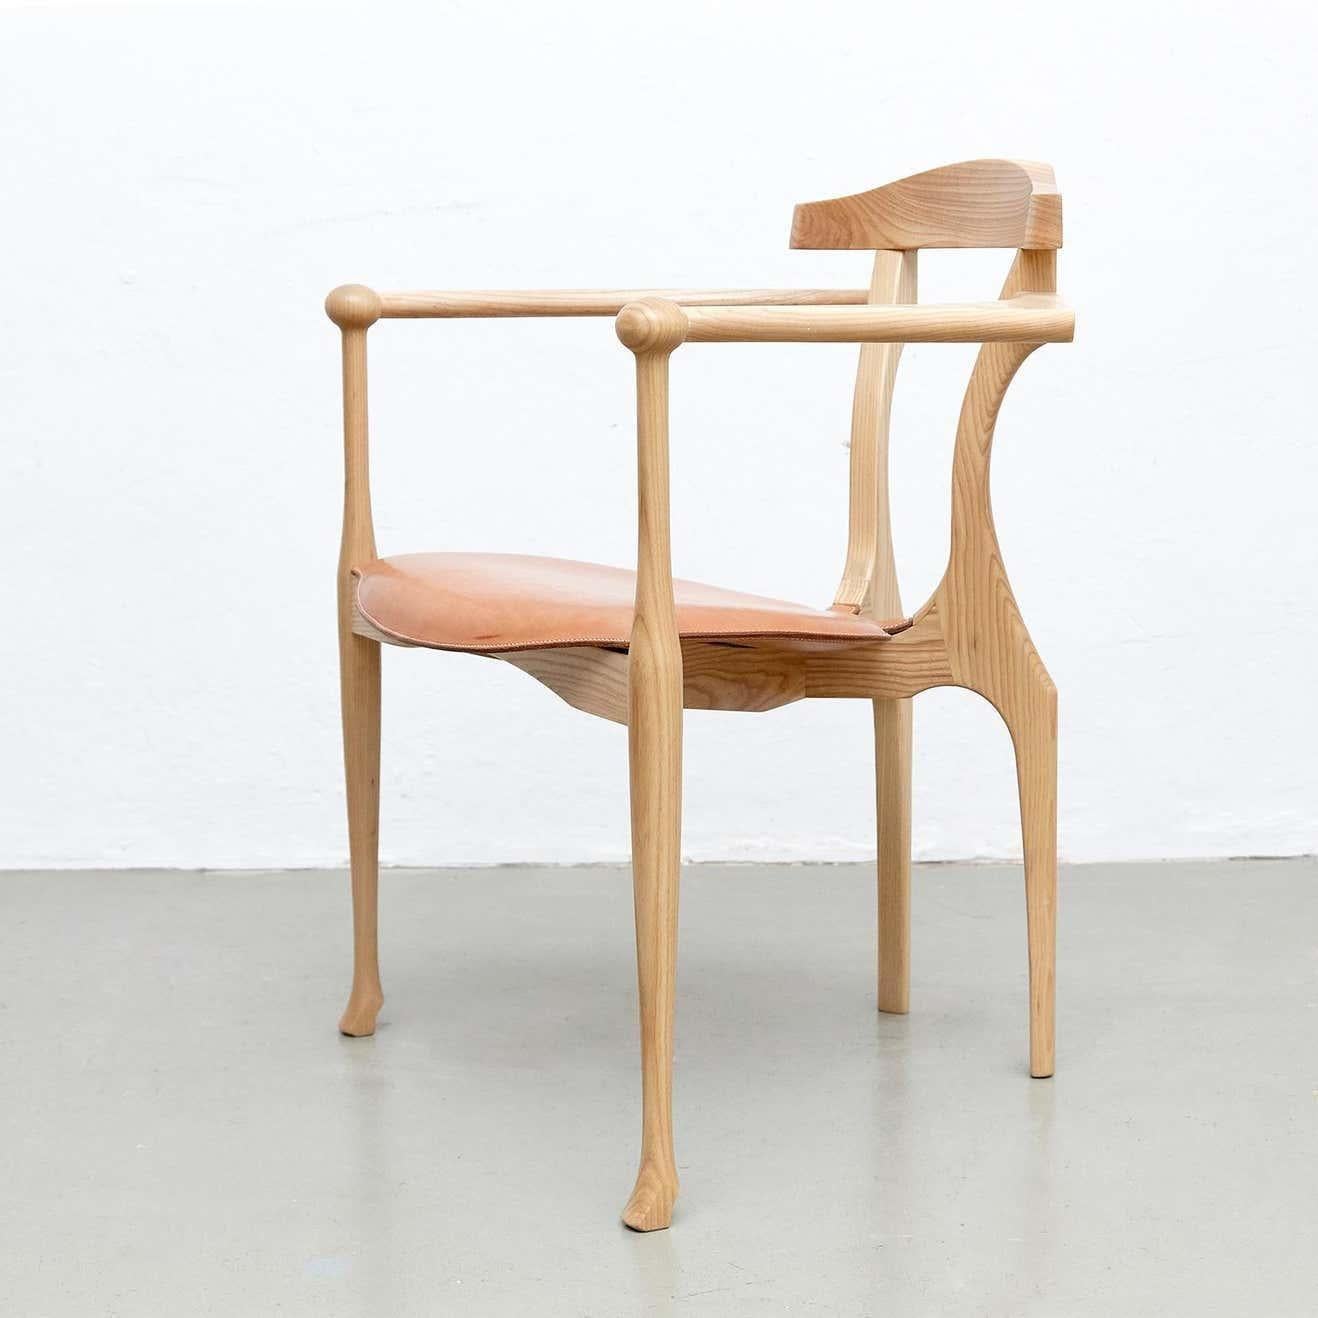 Gaulino armchair prototype designed by Oscar Tusquets manufactured by BD barcelona design, circa 2010.

Structure and back in wood, seat with upholstered in leather.

In good original condition, with minor wear consistent with age and use,